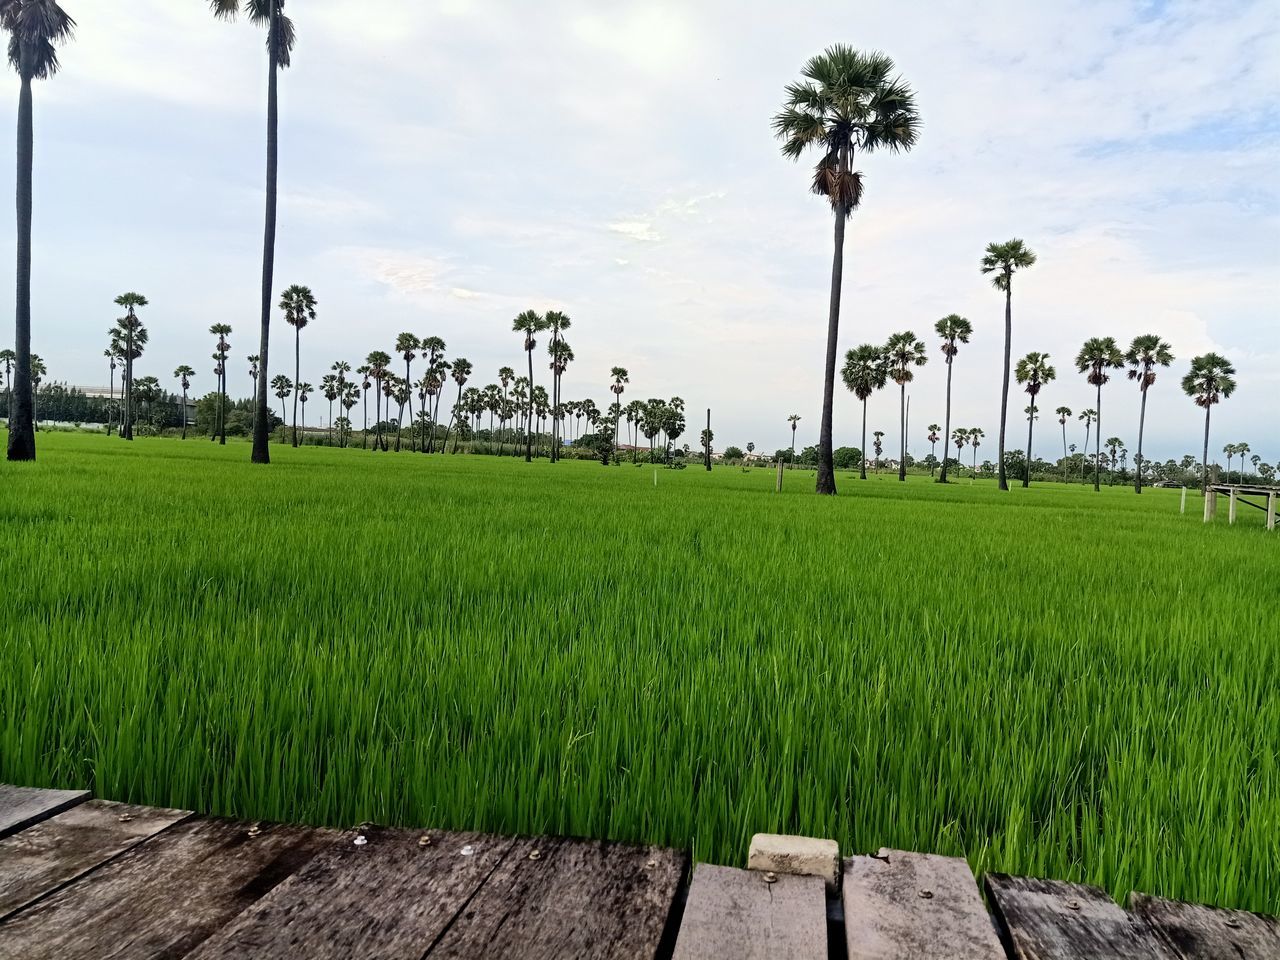 plant, sky, paddy field, agriculture, grass, palm tree, nature, field, tree, landscape, tropical climate, land, cloud, environment, green, rural scene, rural area, rice paddy, rice, beauty in nature, crop, growth, outdoors, scenics - nature, tranquility, no people, day, farm, coconut palm tree, environmental conservation, tranquil scene, water, travel destinations, food and drink